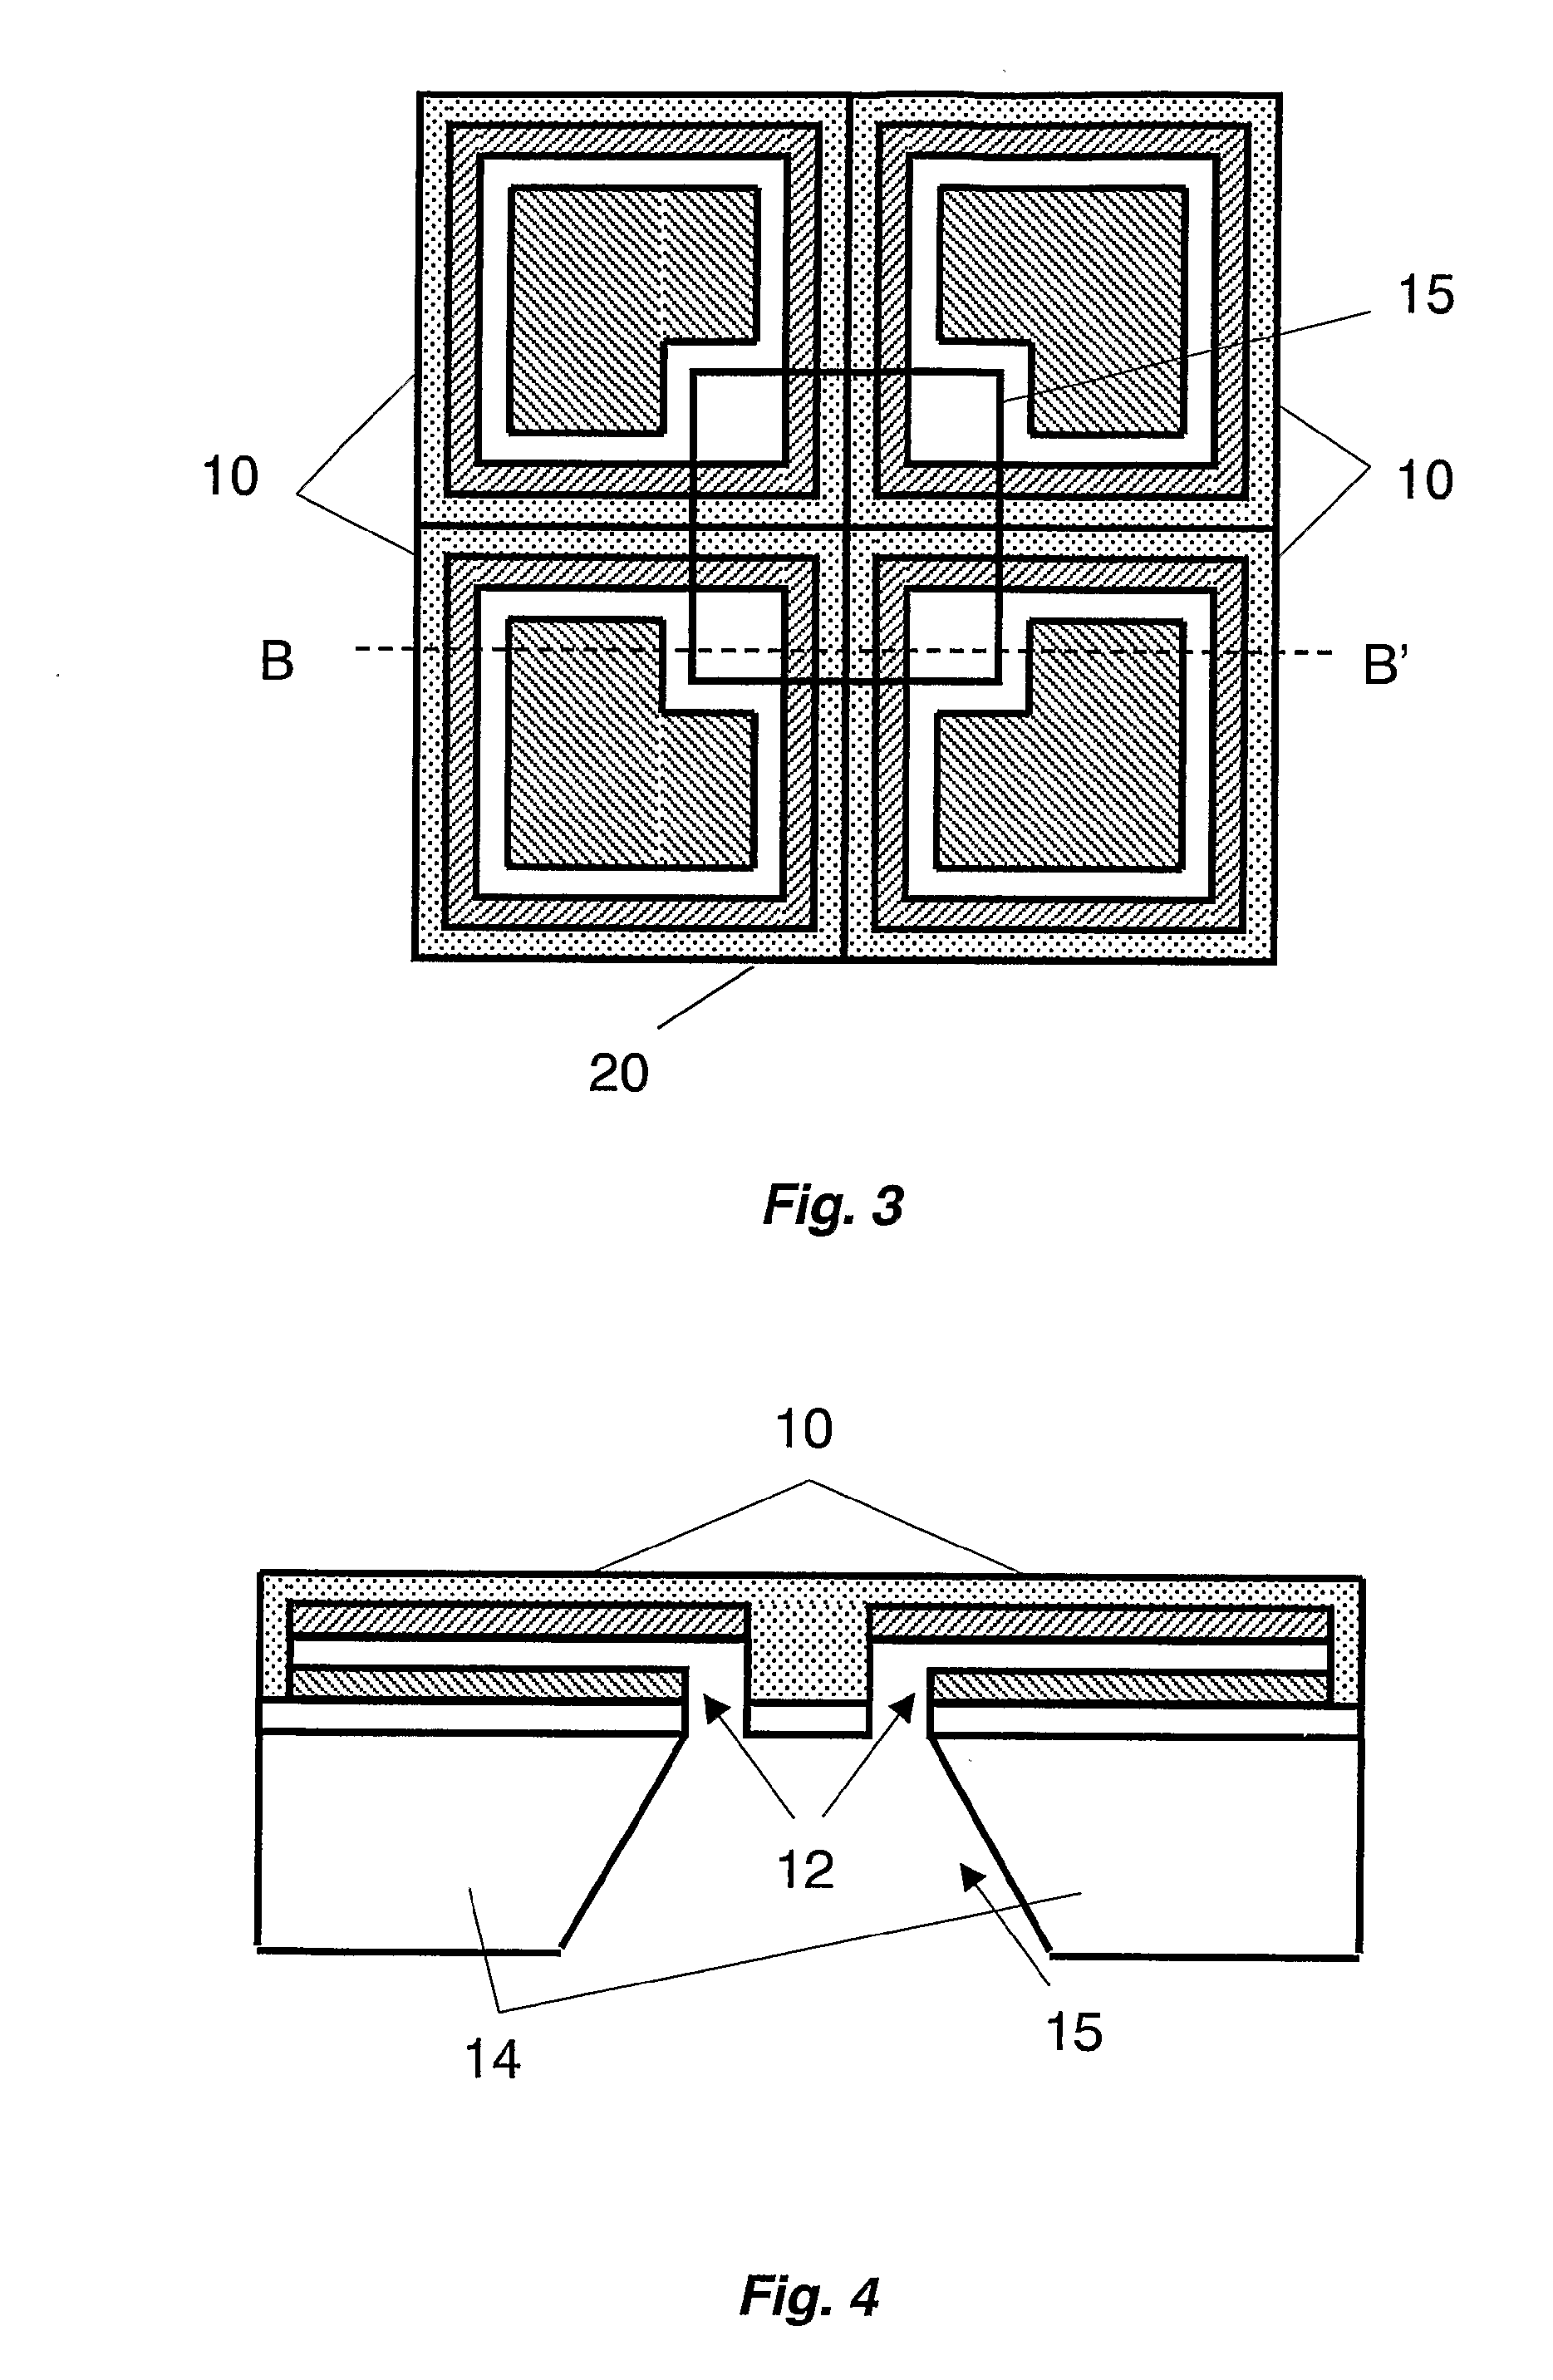 Blood Pressure Monitoring Device and Methods for Making and for Using Such a Device